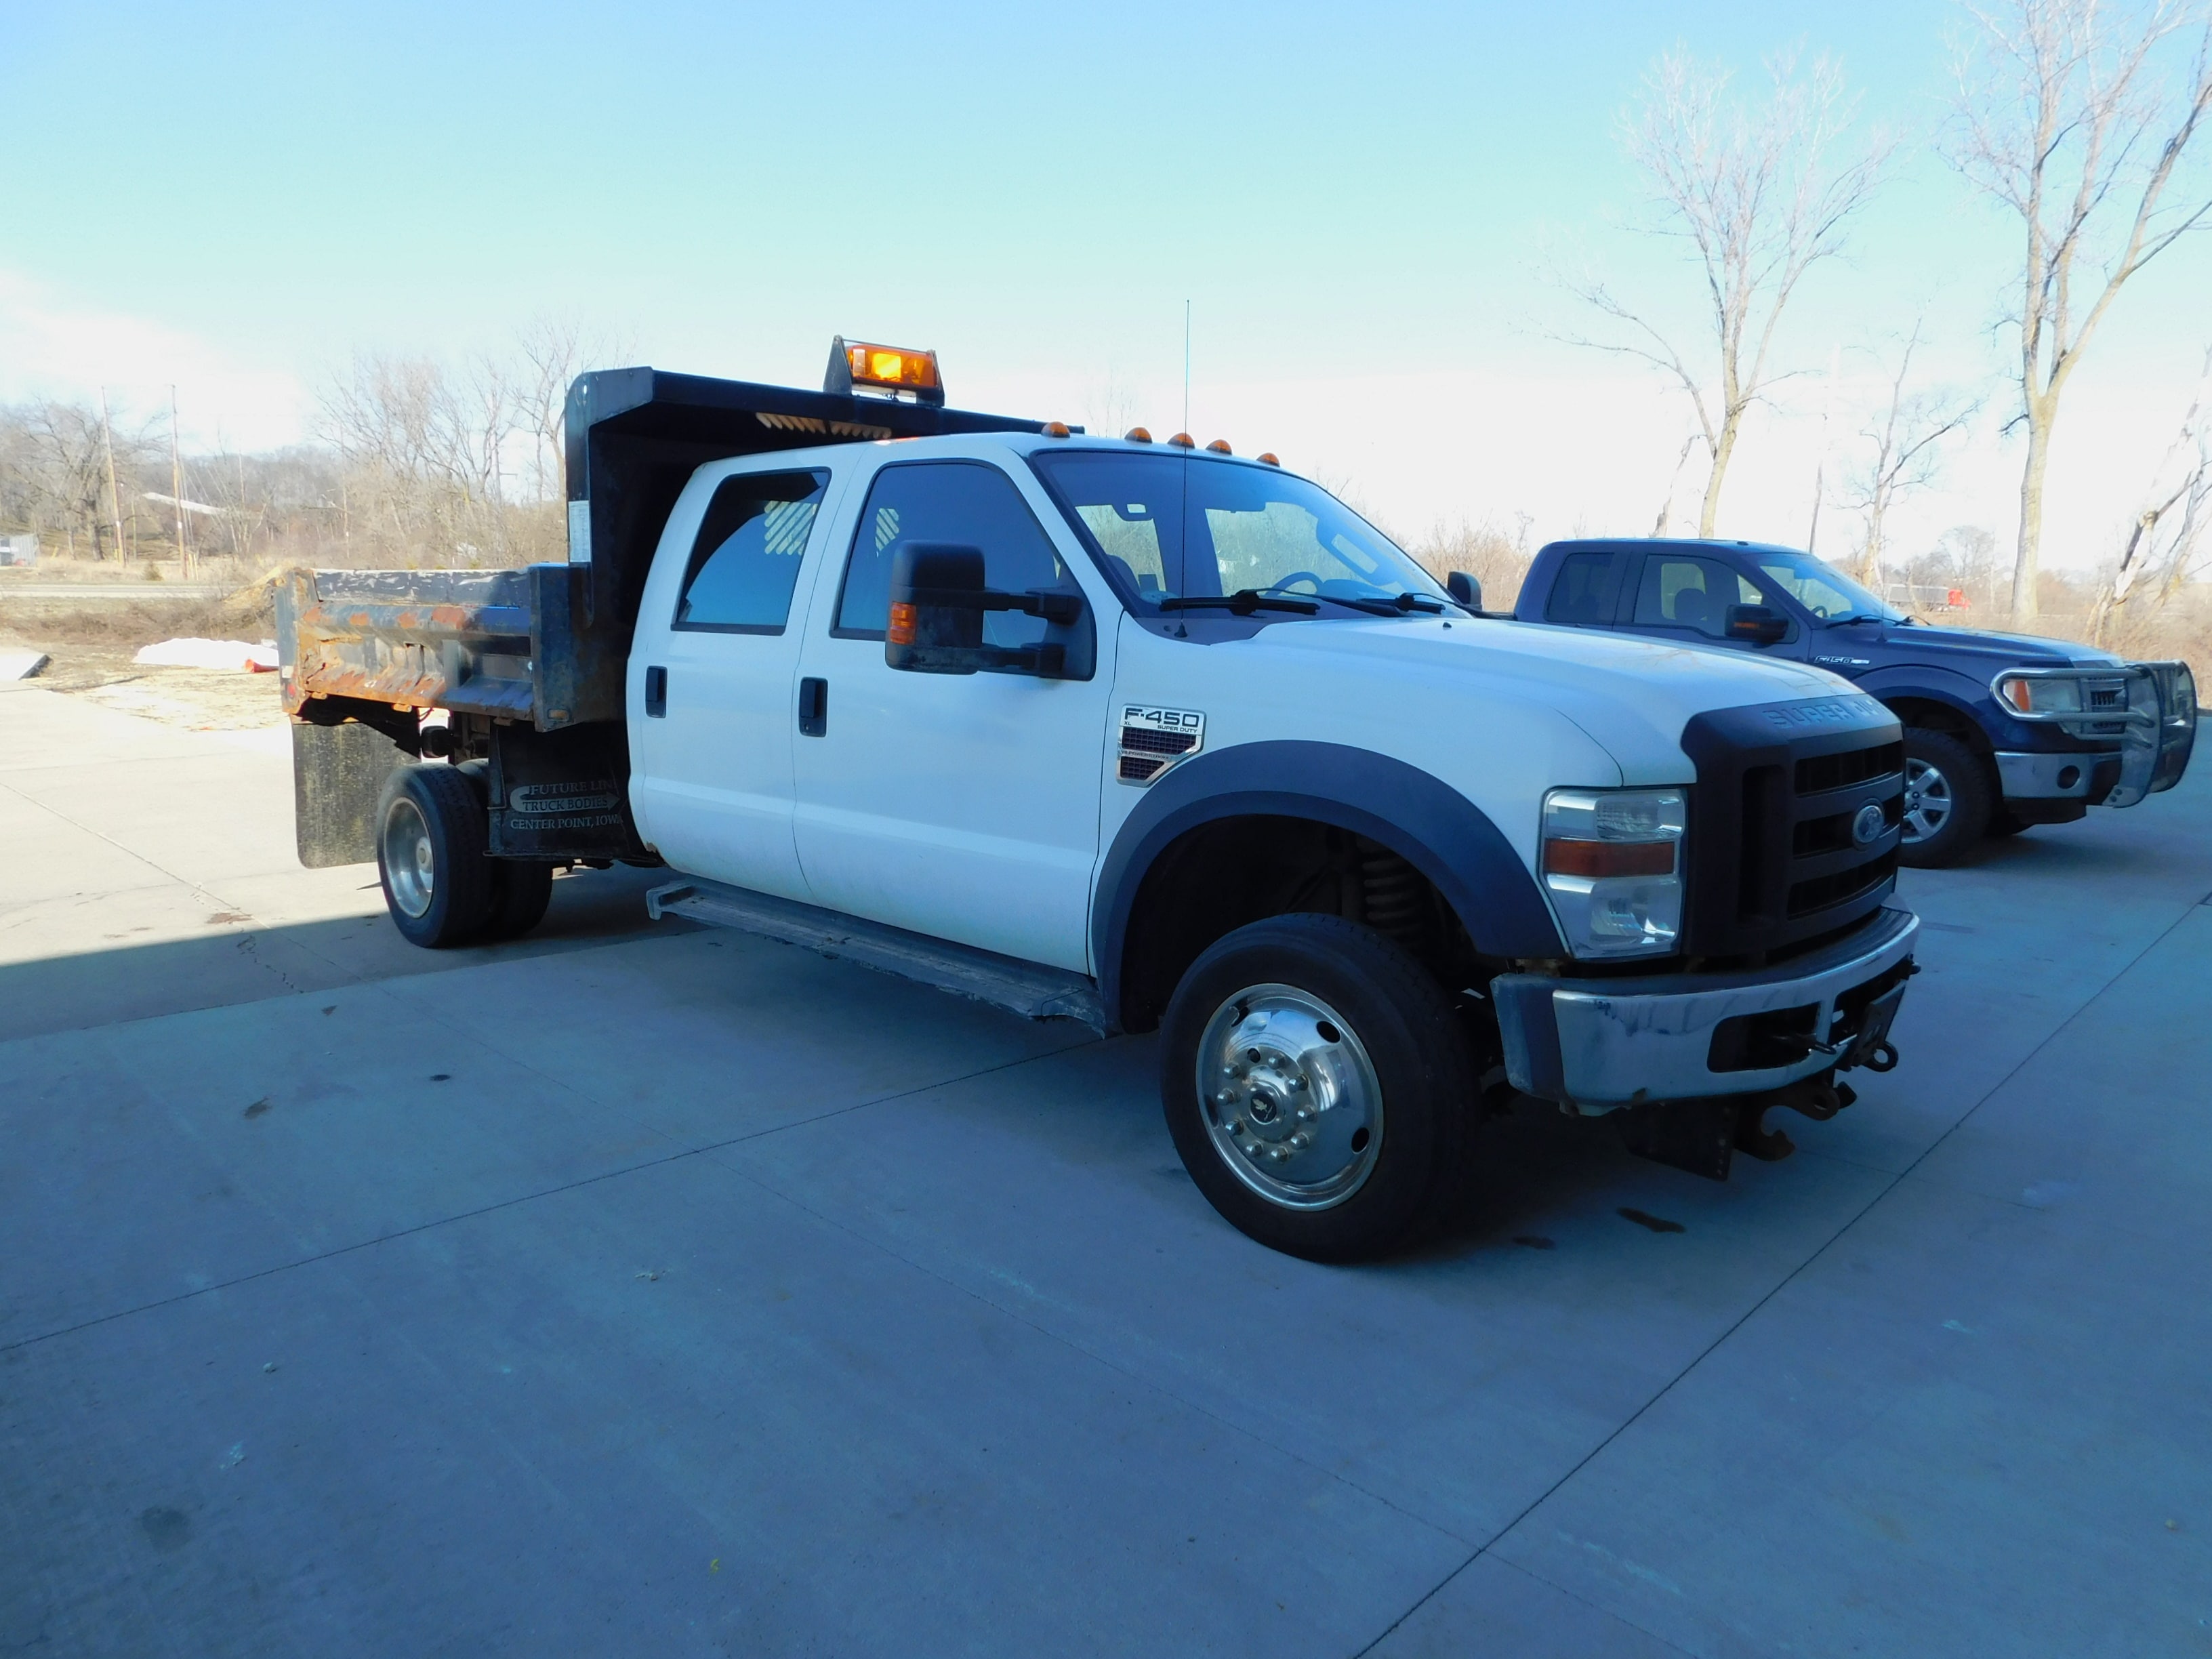 Used 2008 Ford F-450 Super Duty Chassis Cab Lariat with VIN 1FDXW47R98EA36837 for sale in Clinton, IA